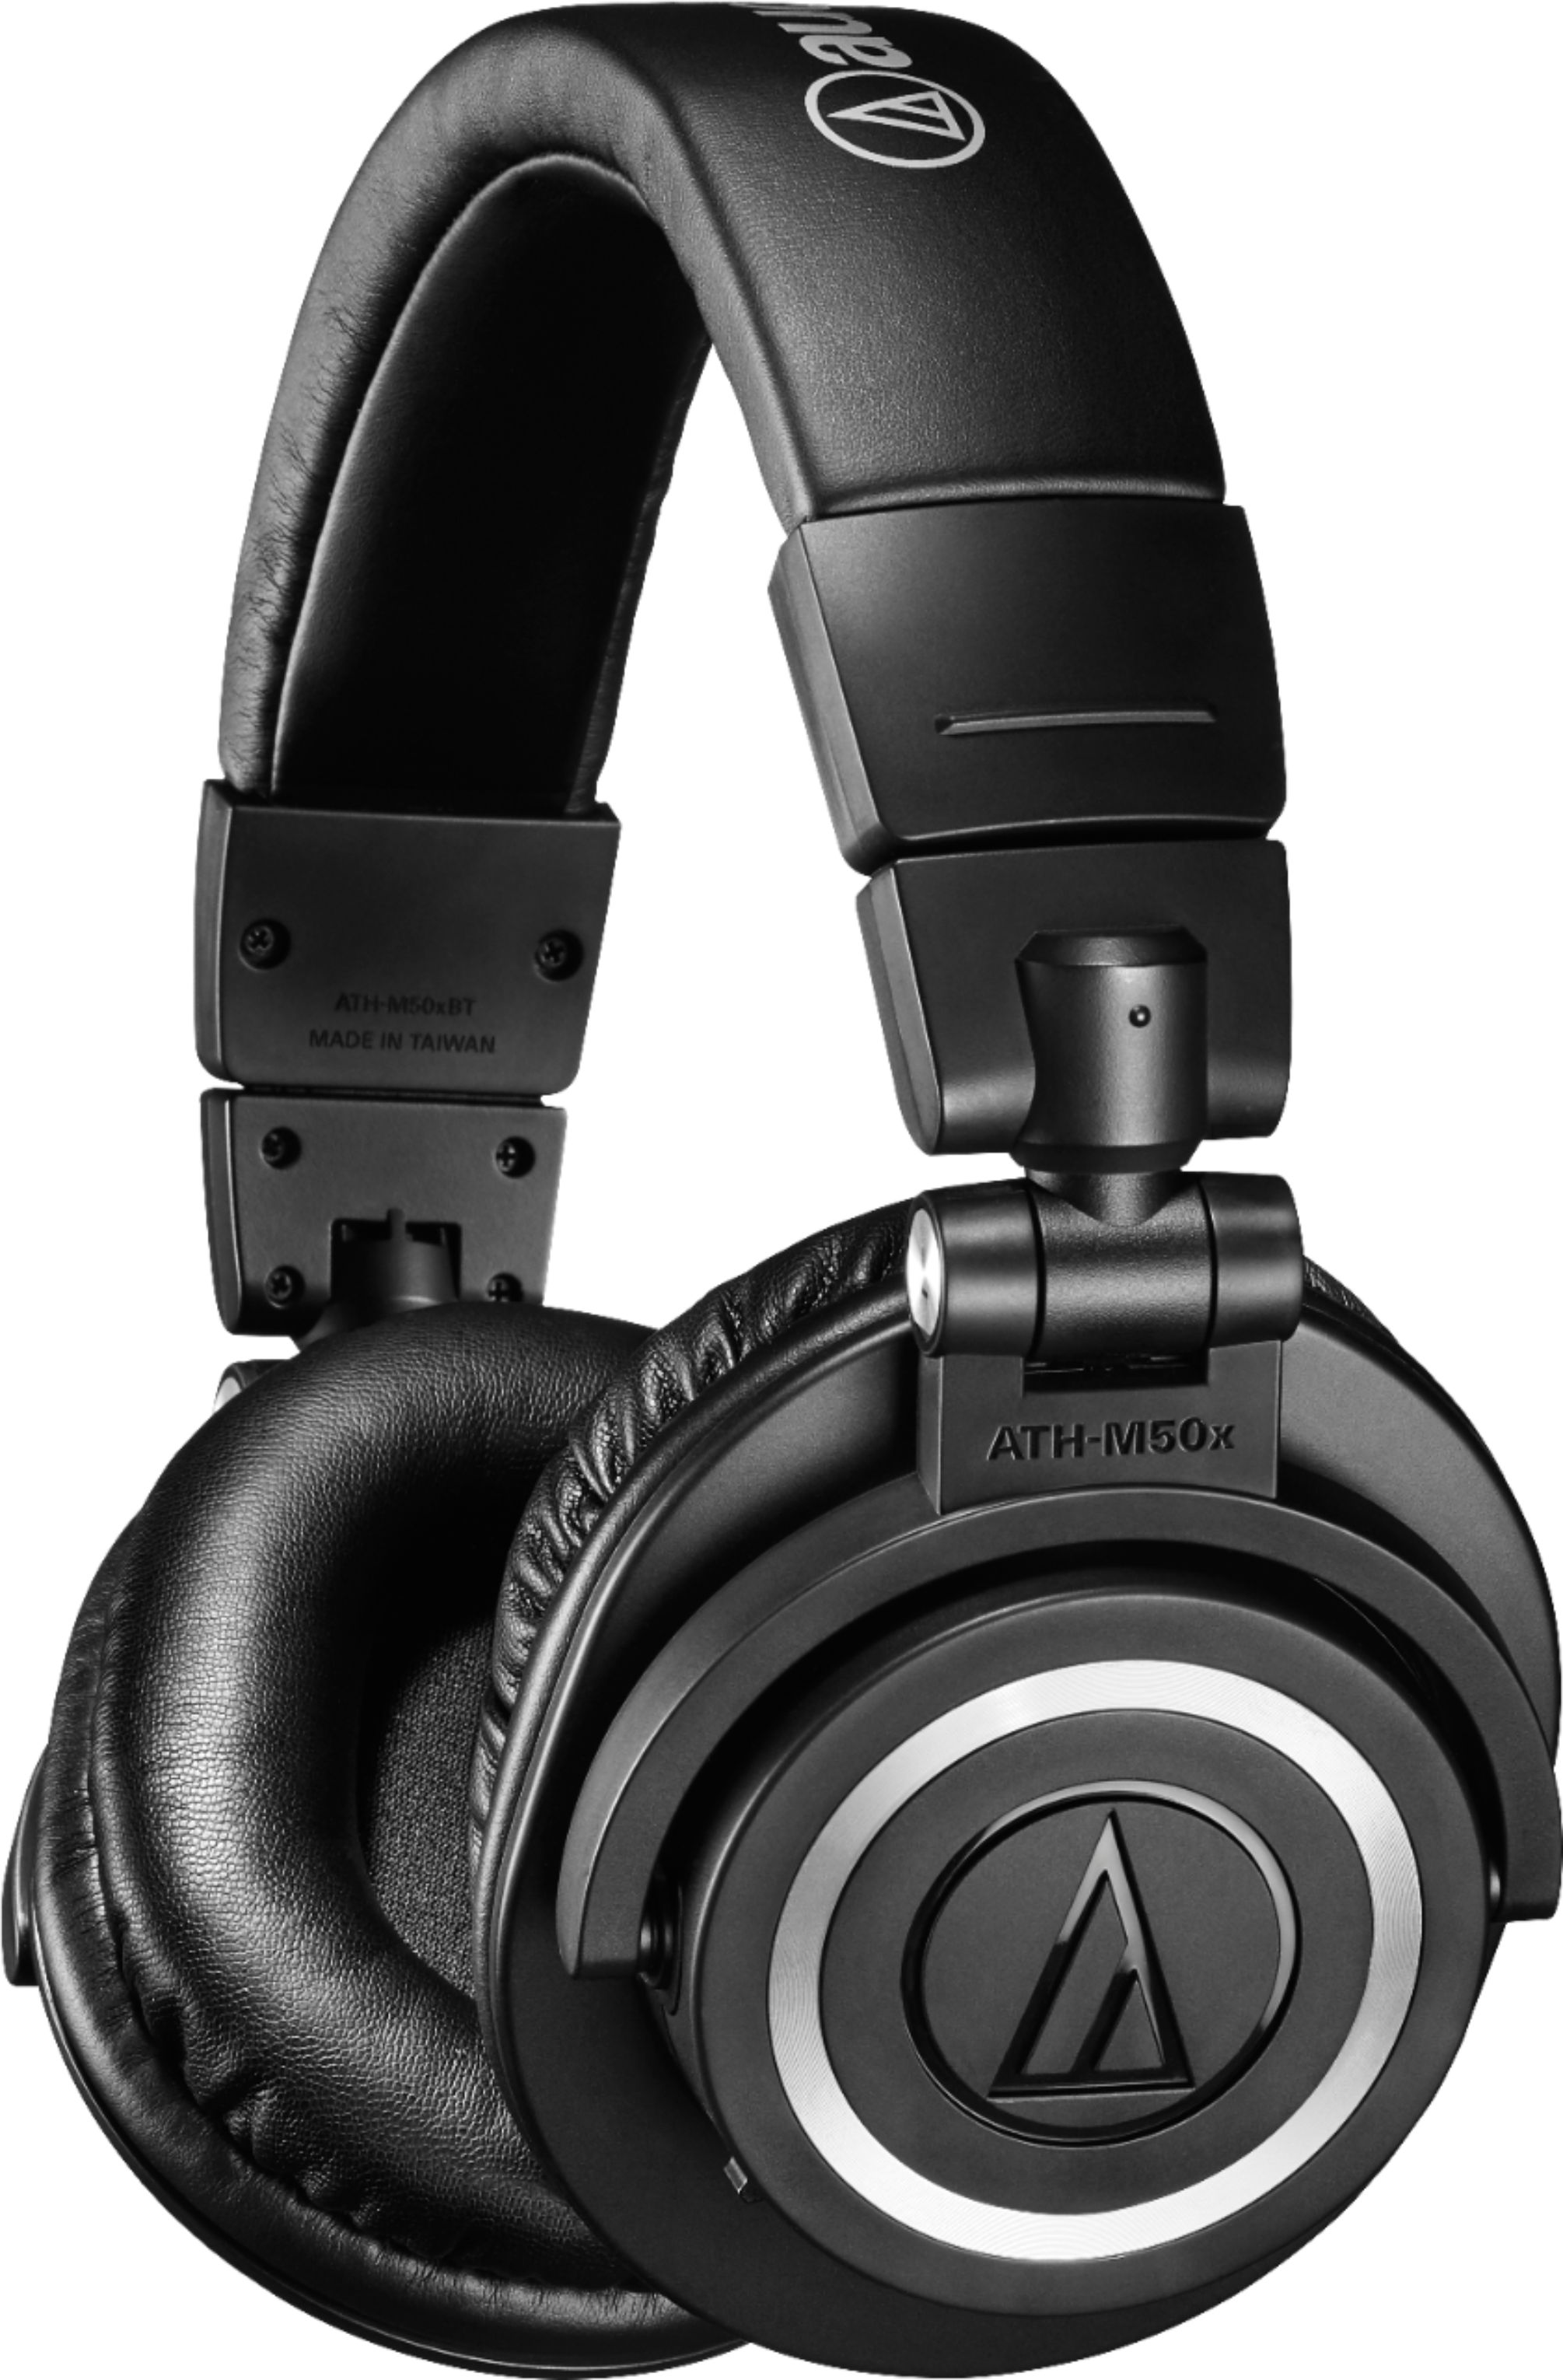 Audio-Technica ATH M50XBT Wireless Over-the-Ear Black ATH-M50XBT - Best Buy